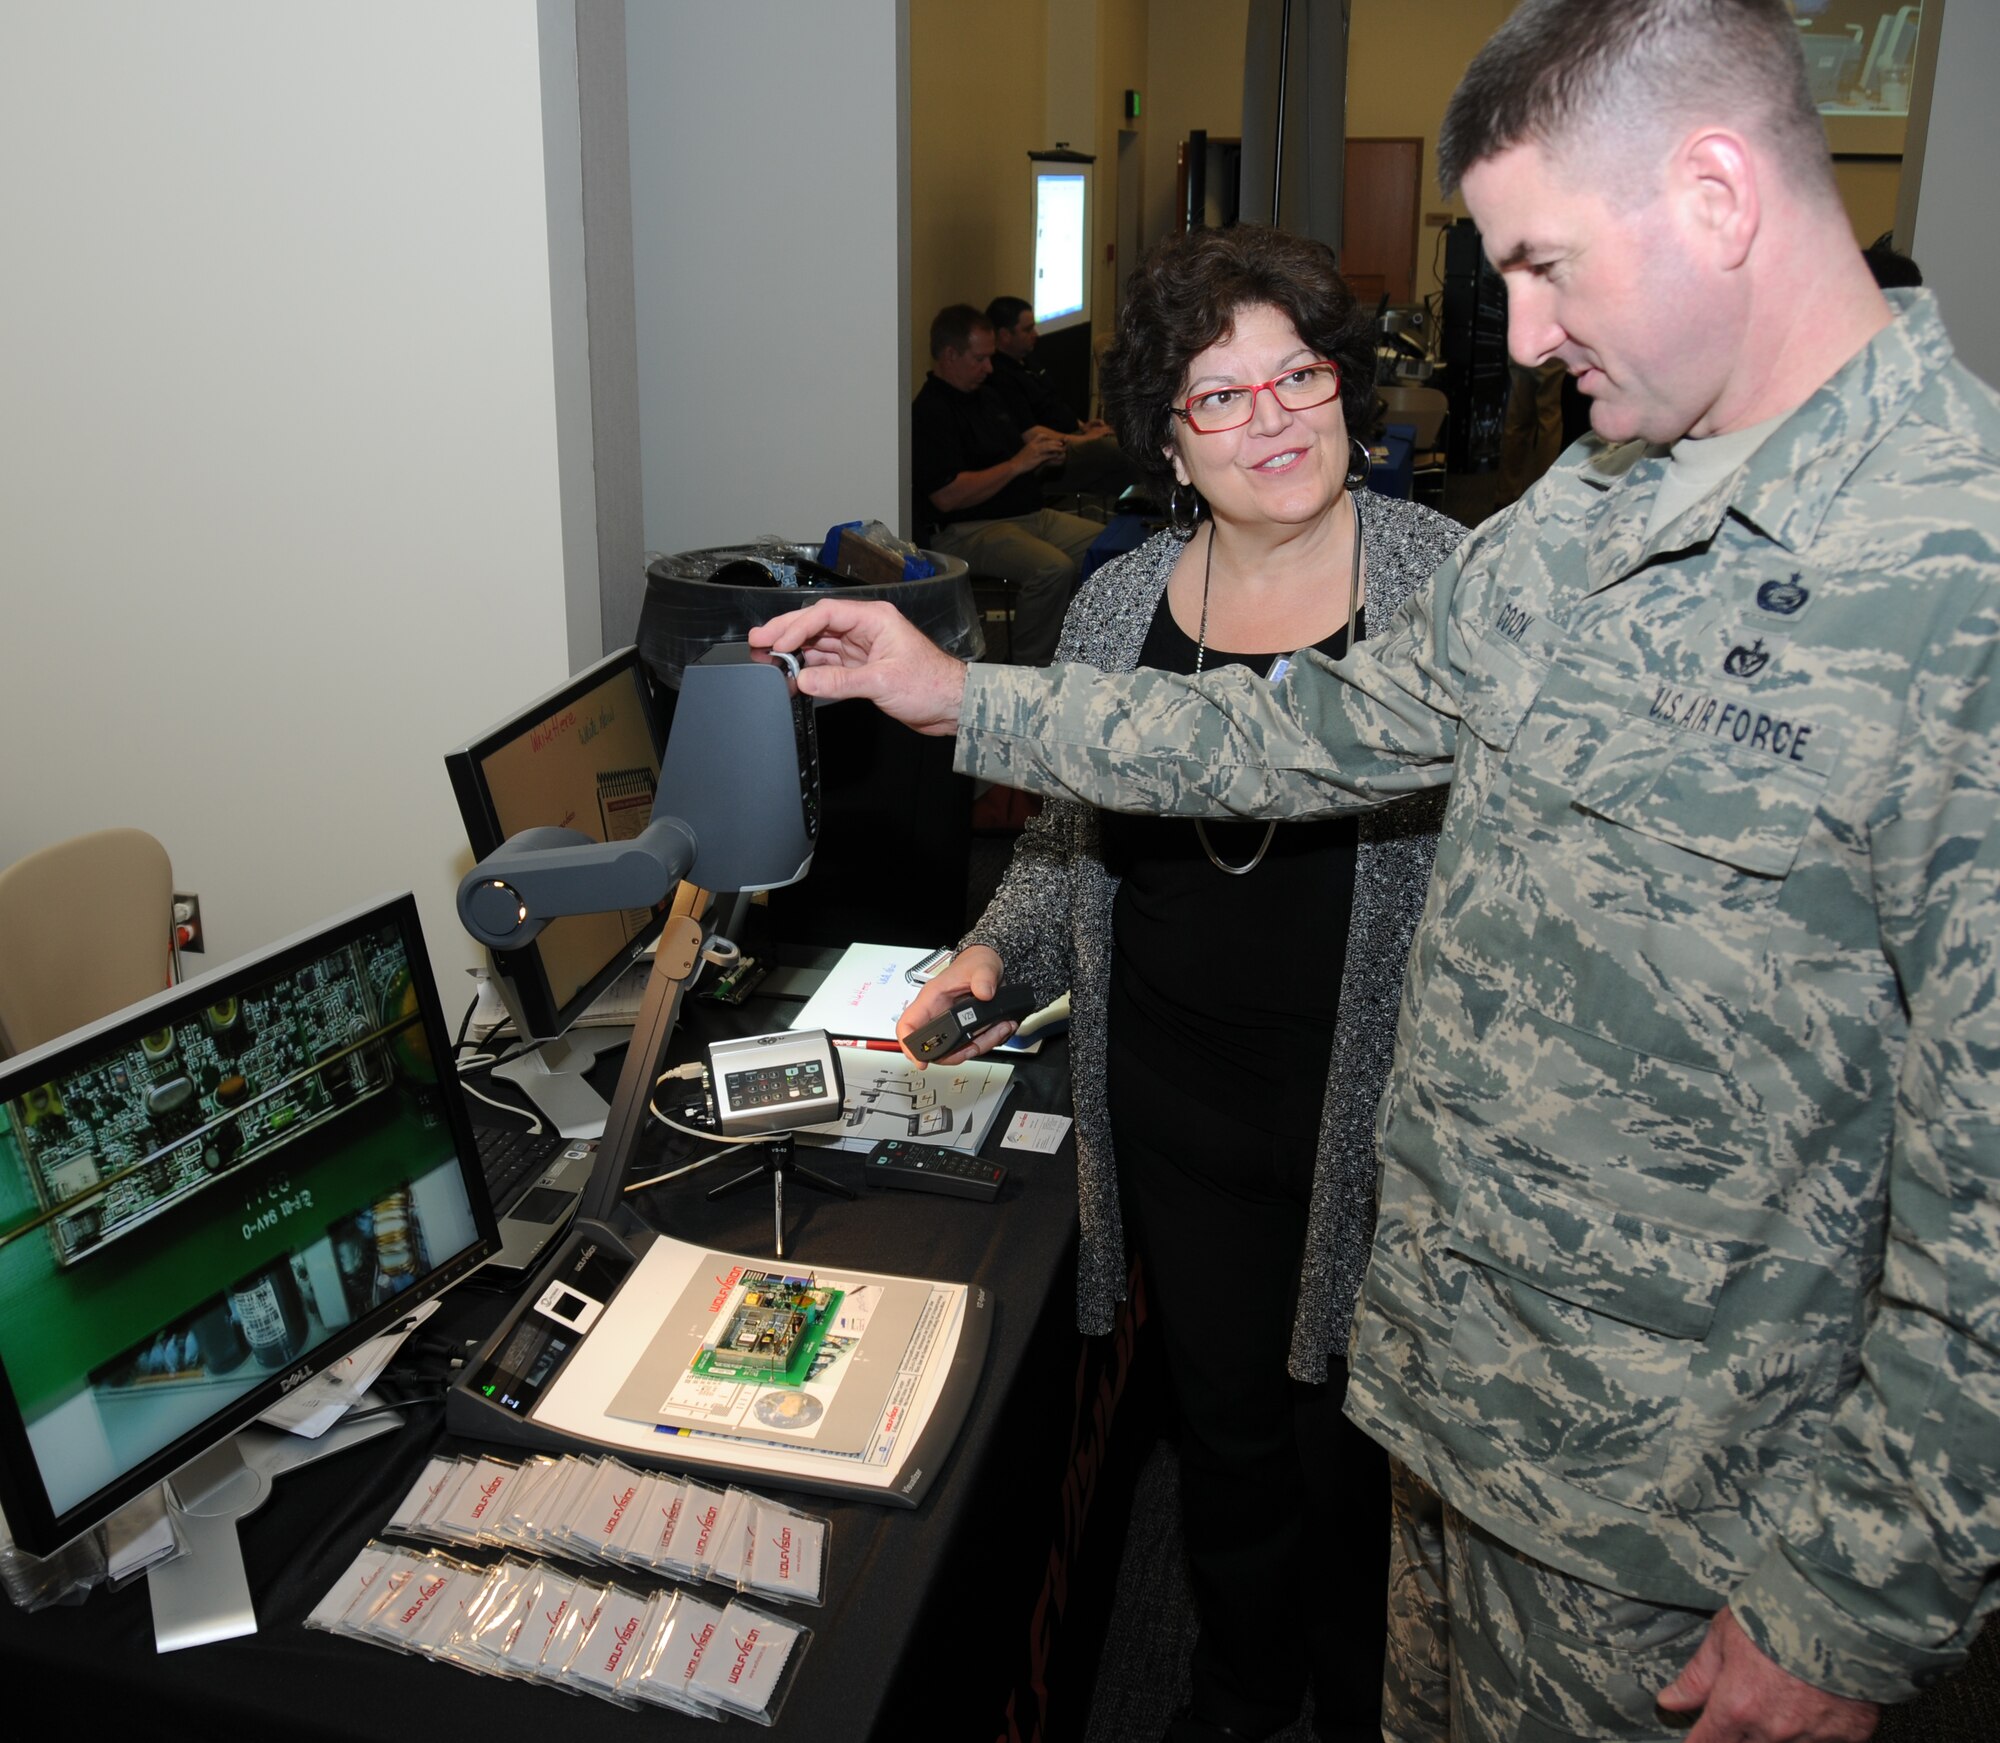 Elaine Liner, WolfVision regional sales manager, allows Master Sgt. Jay Cook, 335th Training Squadron, to control a high-definition camera used for training during a technology expo Jan. 9, 2012, at the Roberts Consolidated Aircraft Maintenance Facility, Keesler Air Force Base, Miss.  The 17th annual free expo, hosted by the 81st Training Support Squadron, featured more than 40 exhibitors.  (U.S. Air Force photo by Kemberly Groue)